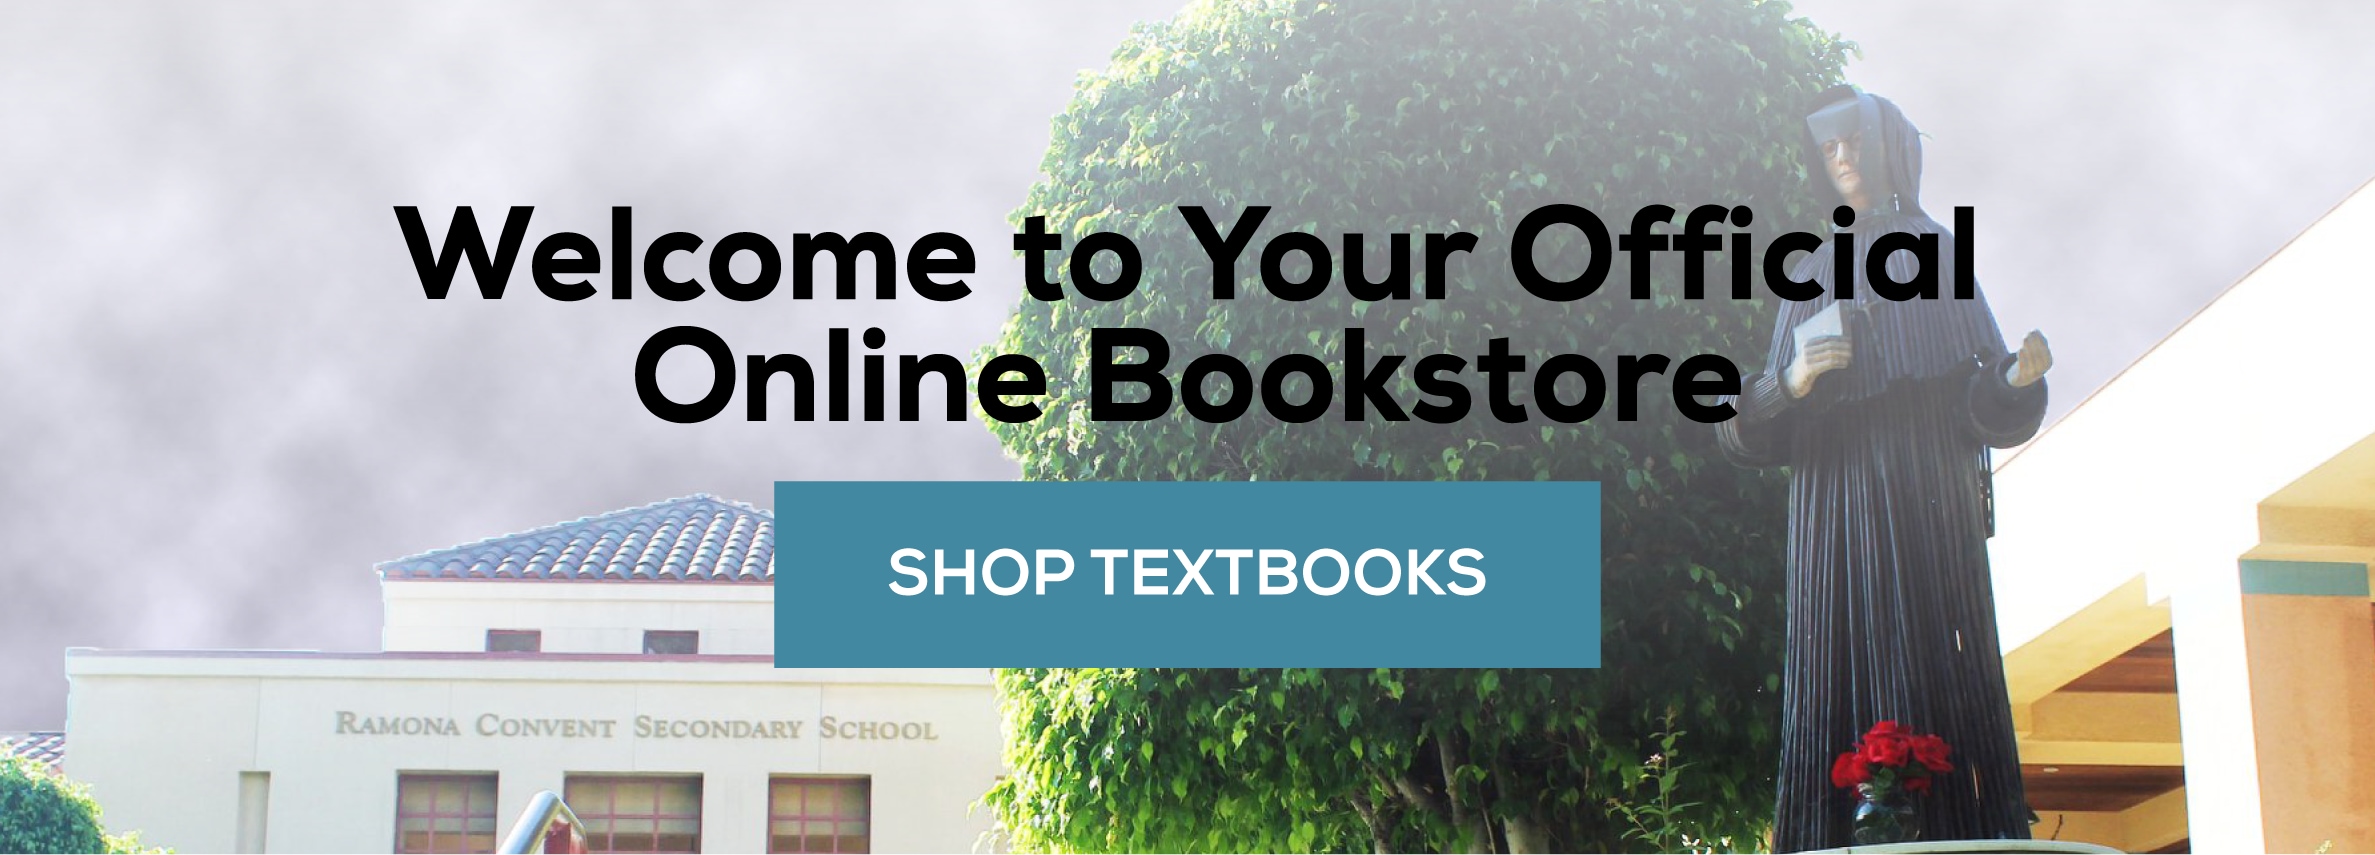 Welcome to Your Official Online Bookstore! Shop textbooks.